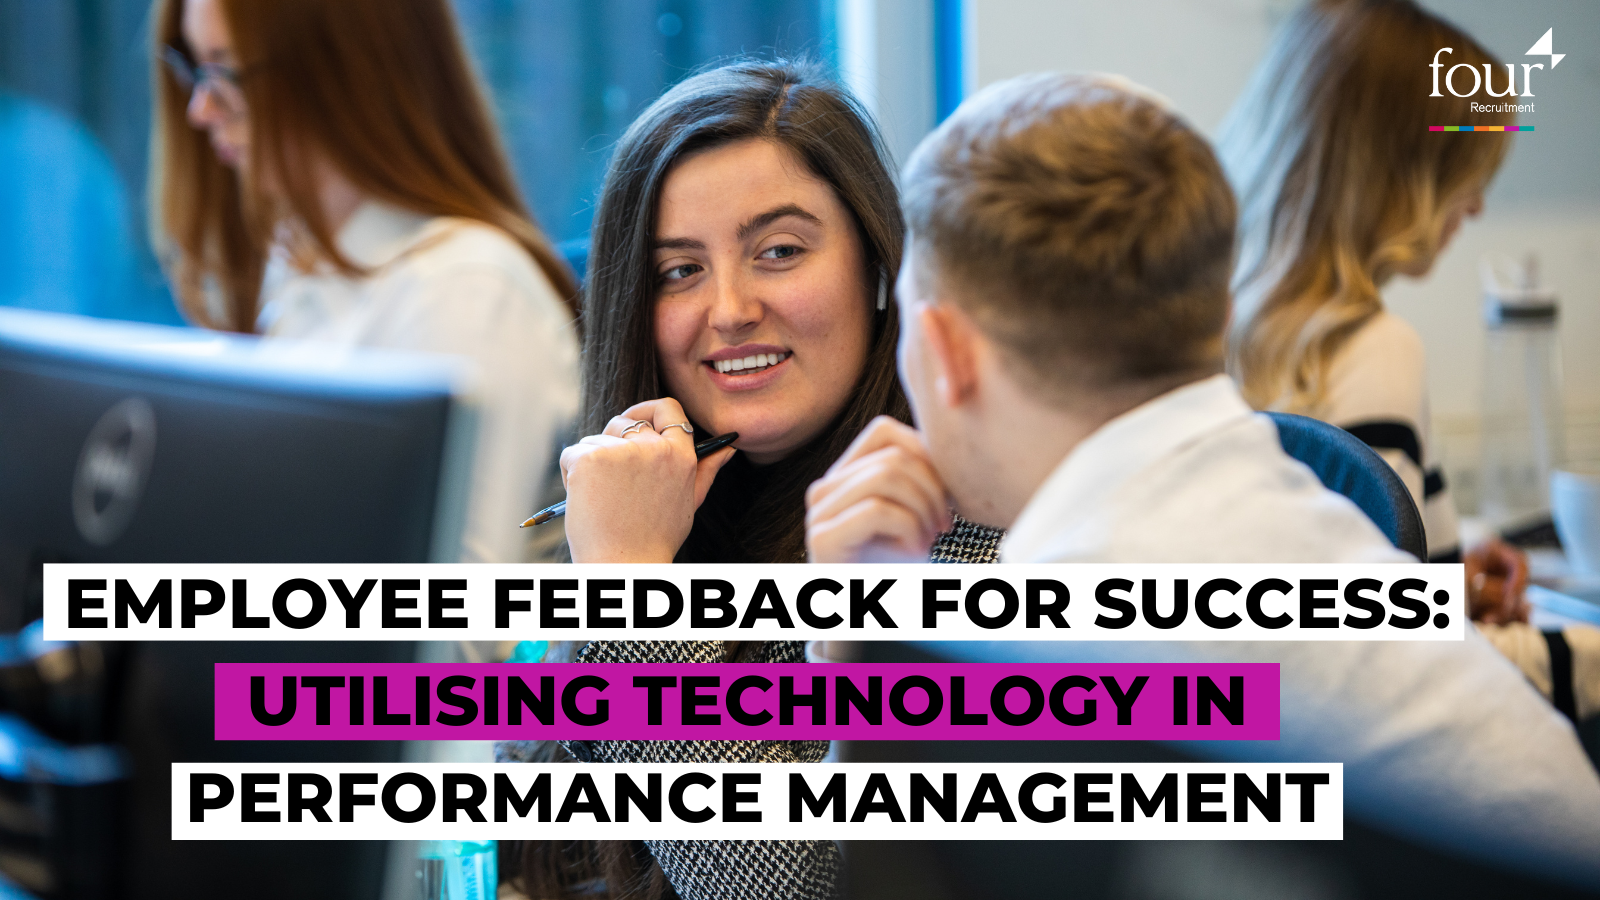 Employee Feedback for Success: Utilising Technology in Performance Management